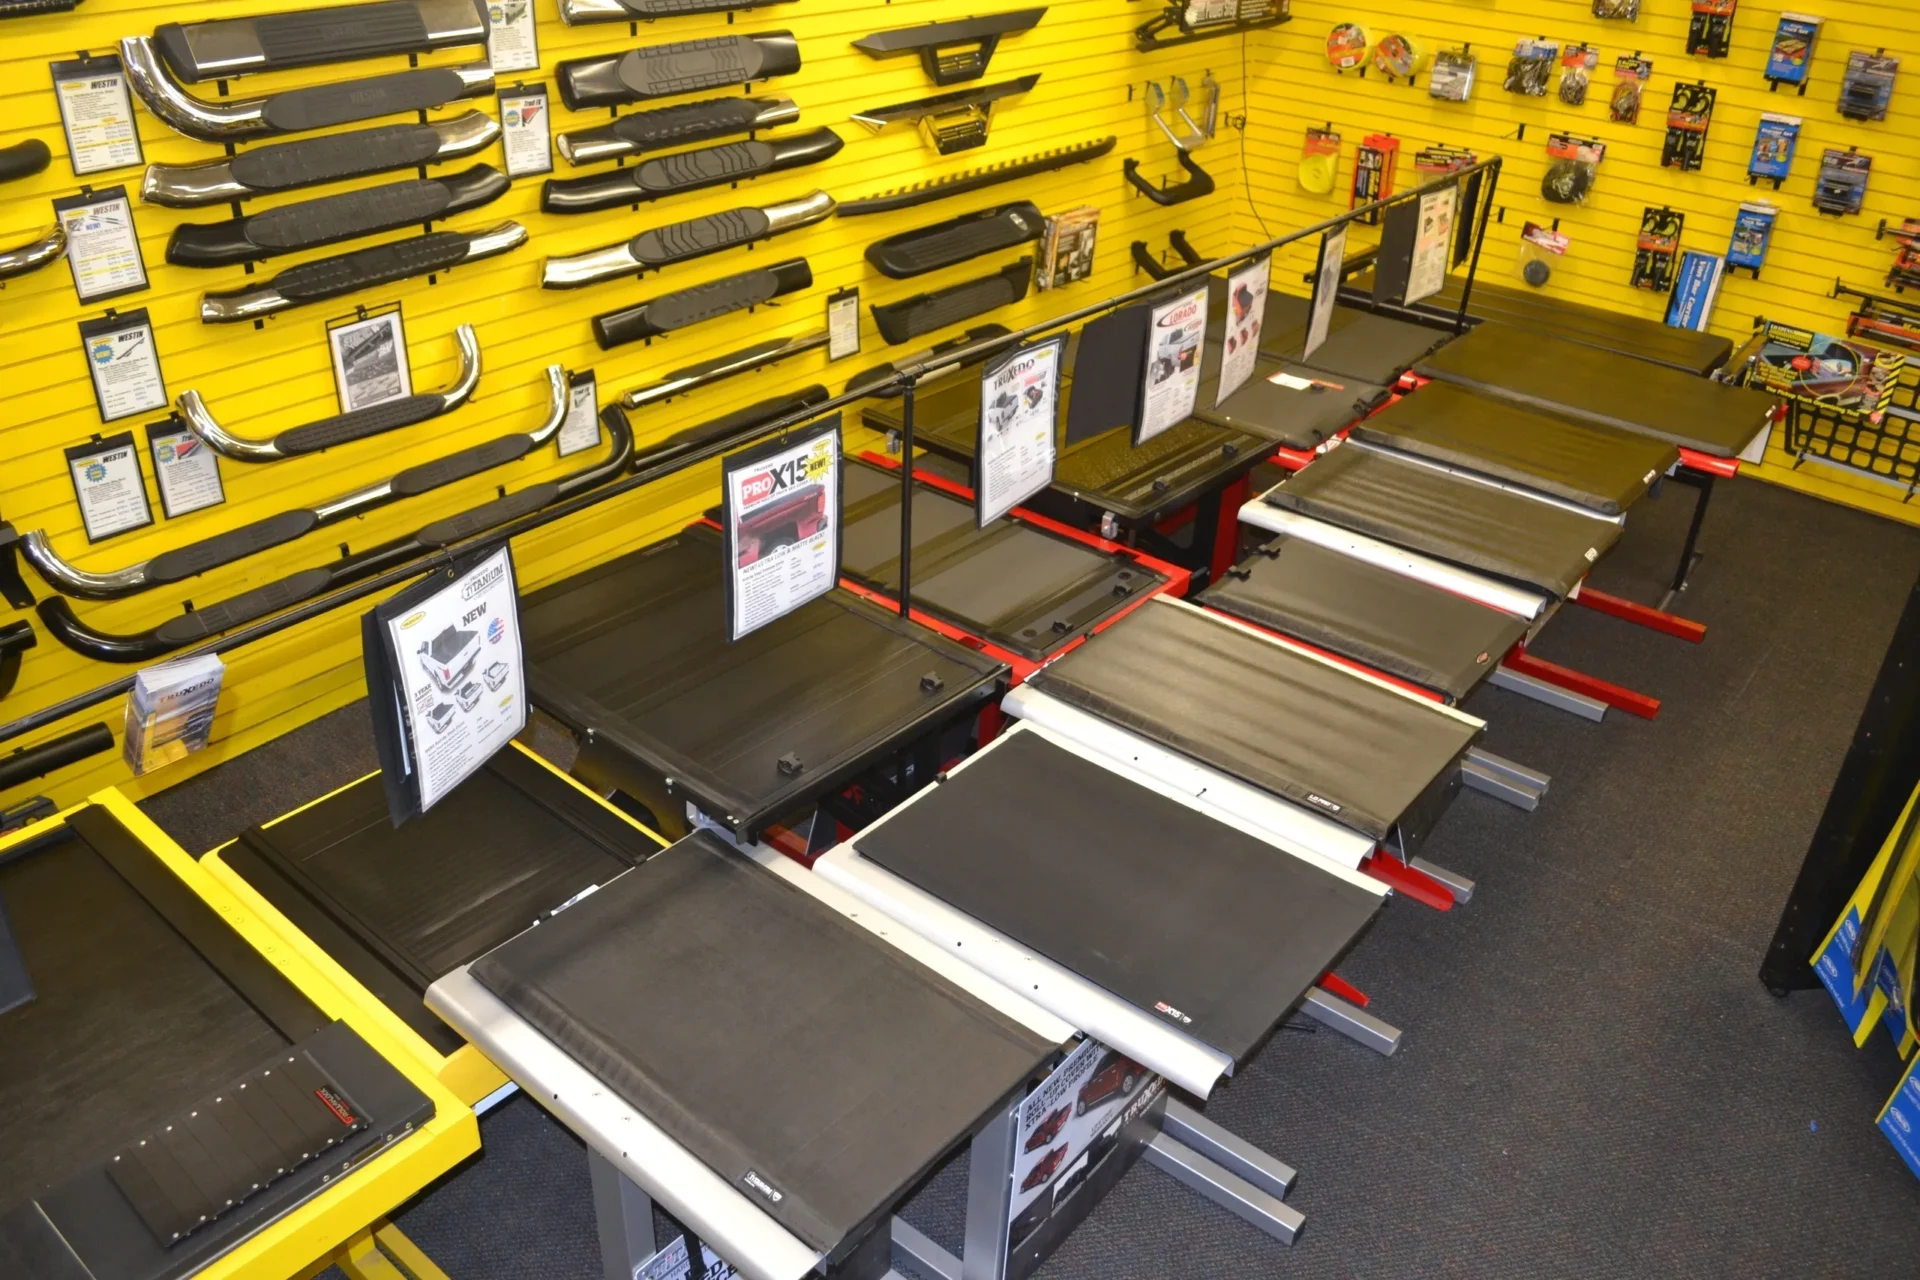 An assortment of treadmills on display in a fitness equipment store with yellow walls lined with accessories.